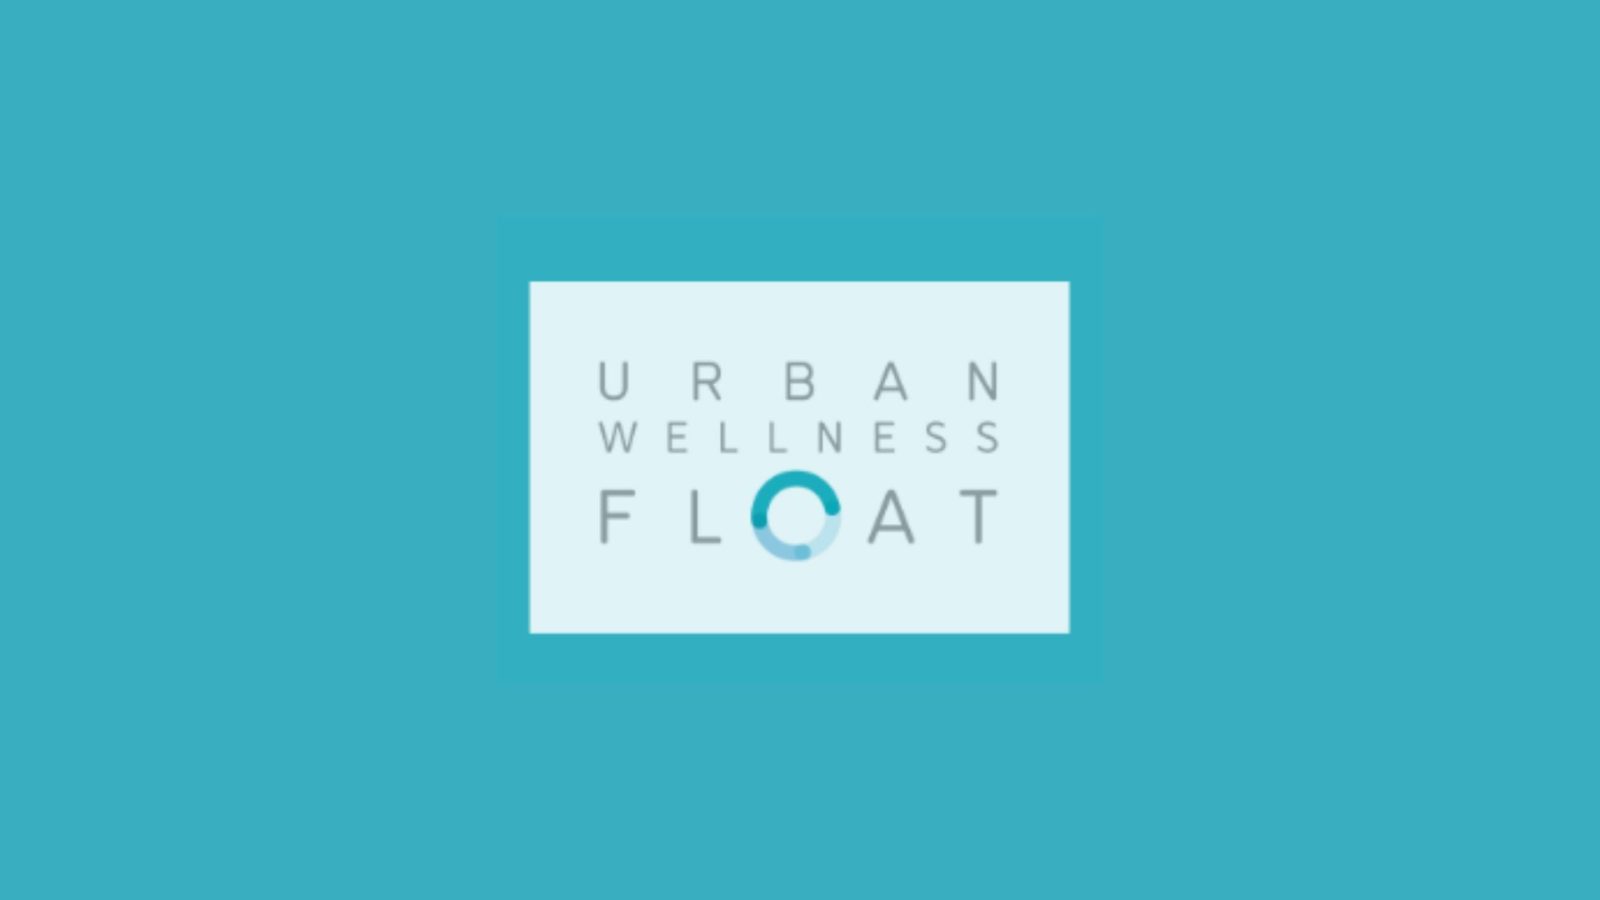 Urban Wellness Float gives Monday blues reminders